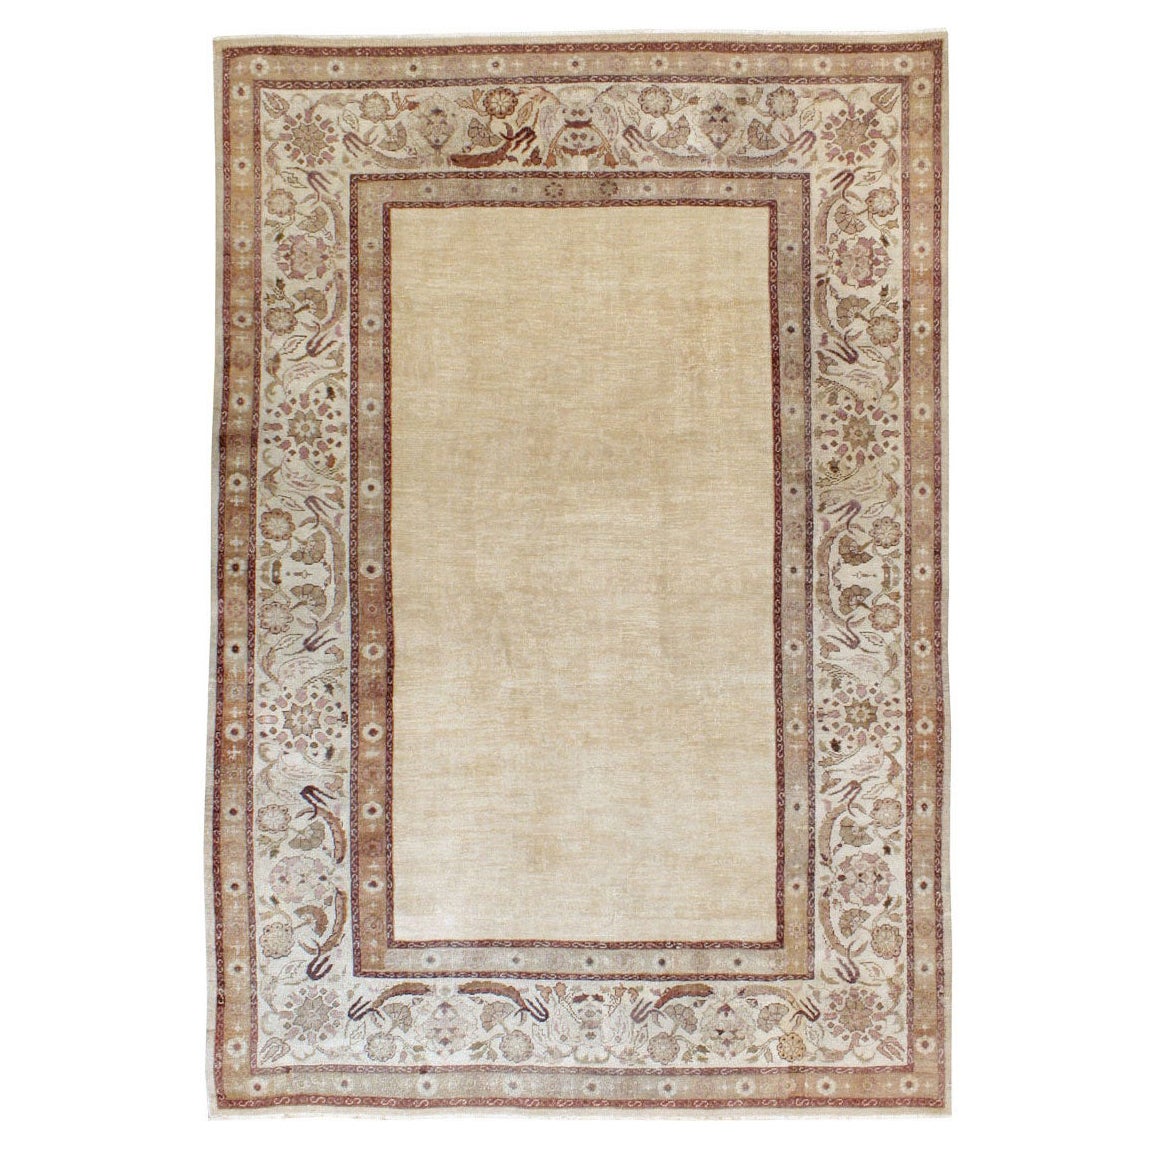 Early 20th Century Handmade Indian Agra Small Room Size Carpet For Sale